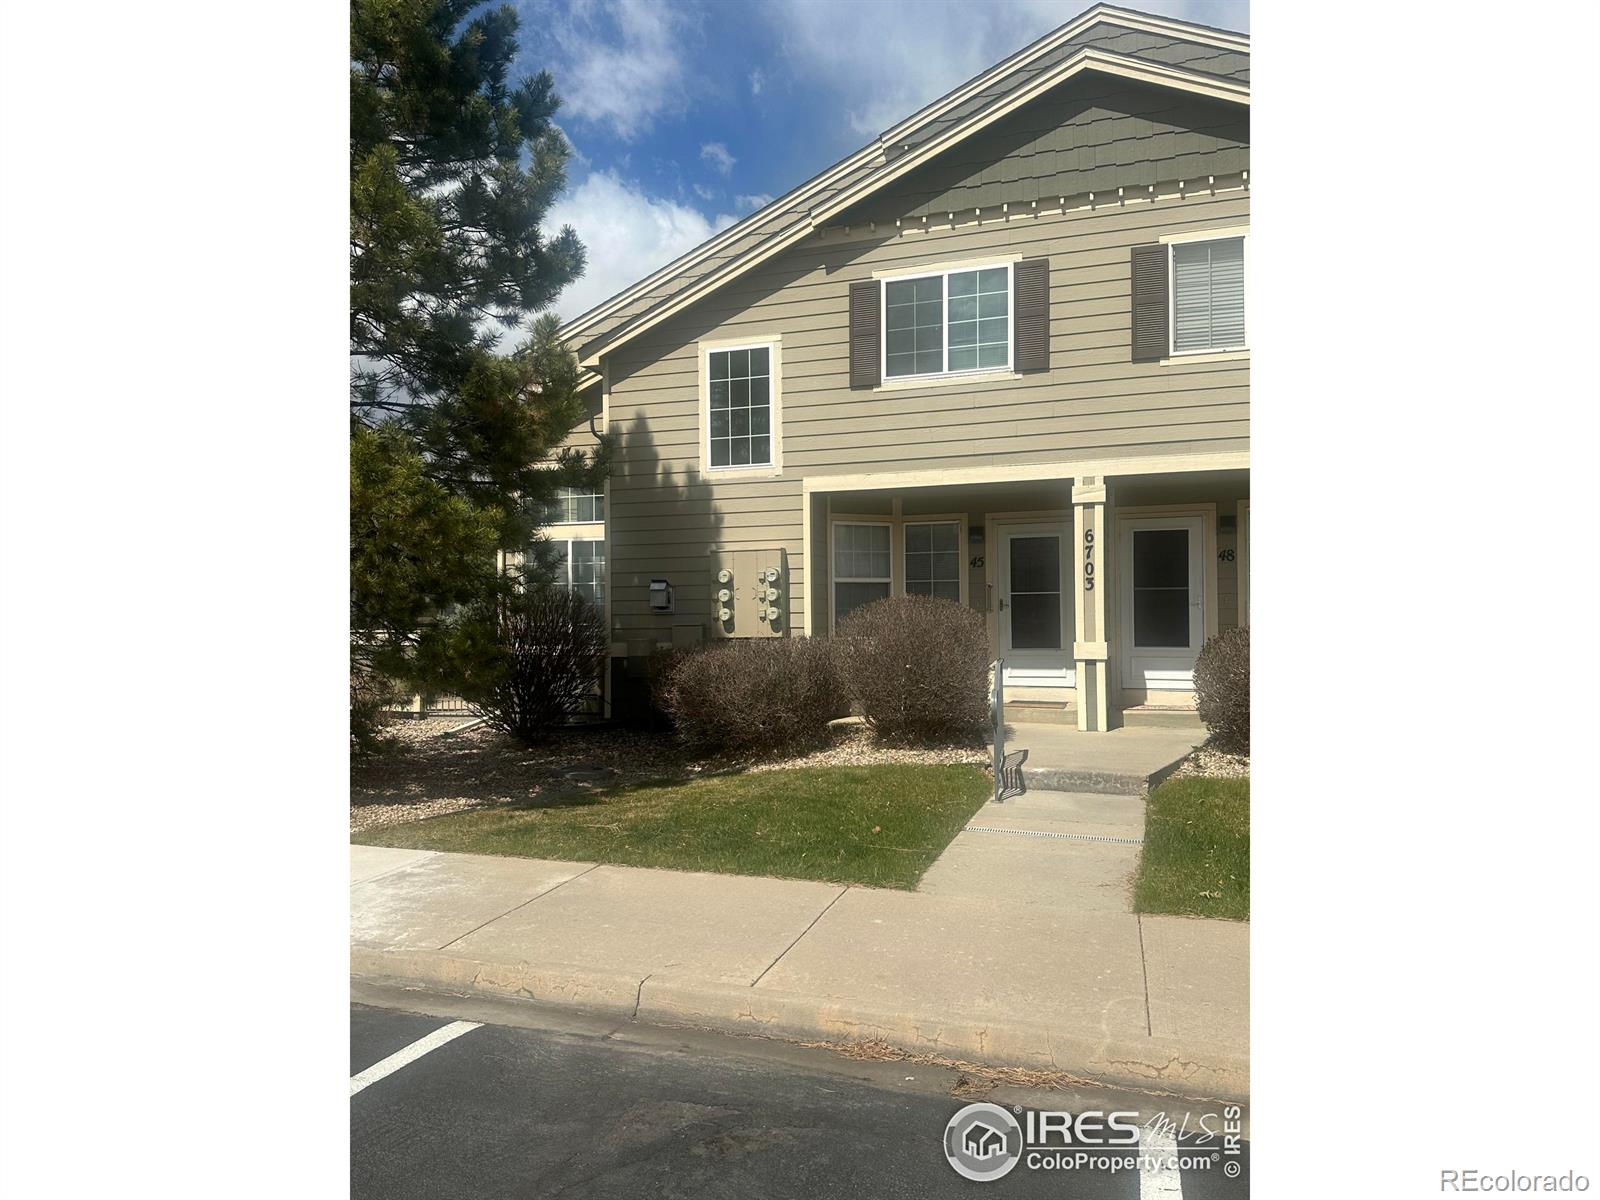 6703  Antigua Drive, fort collins MLS: 4567891006975 Beds: 2 Baths: 2 Price: $350,000